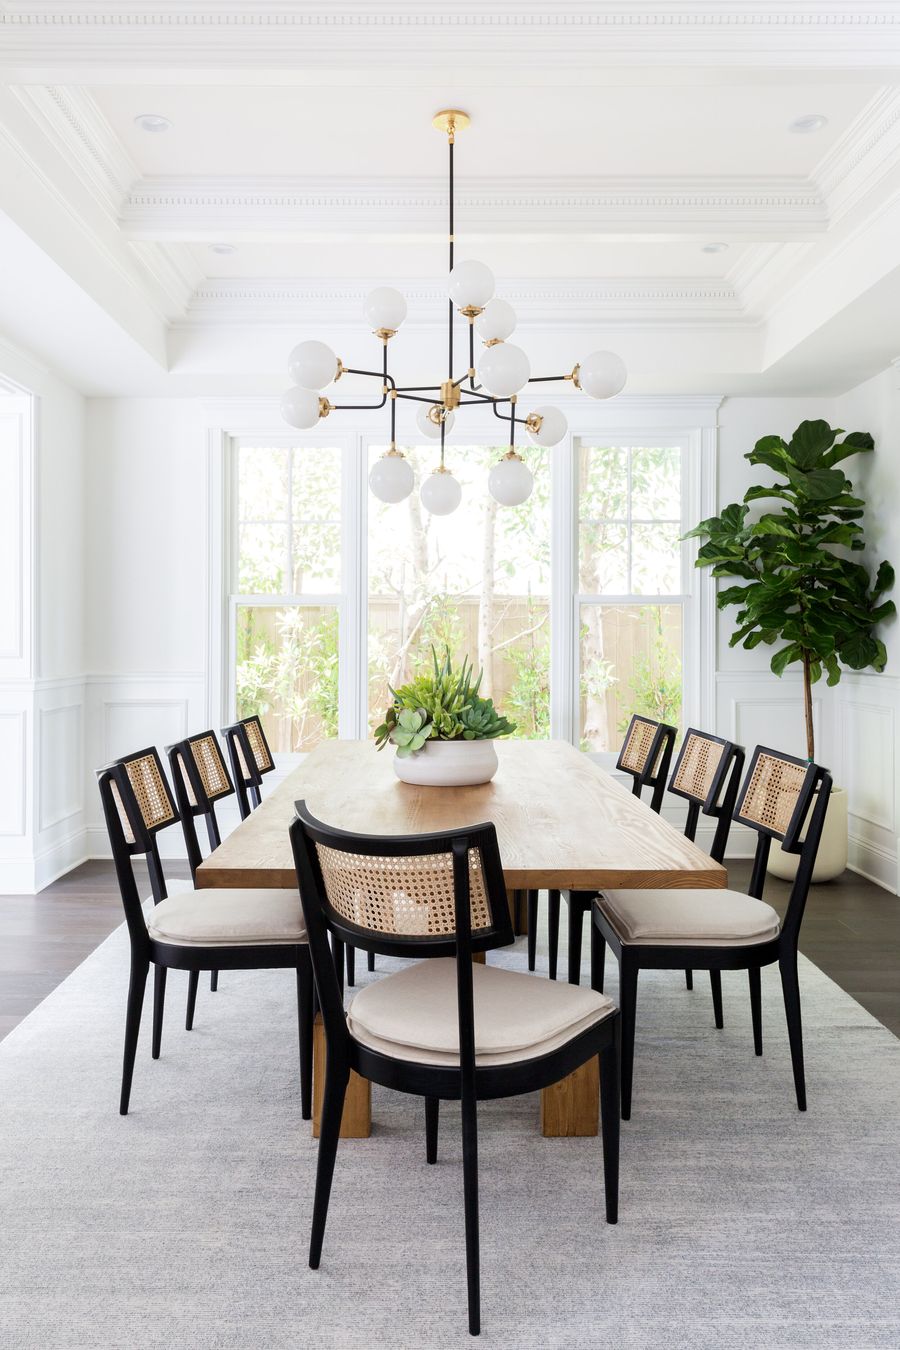 California dining room chairs with cane back via Lindsey Brooke Design